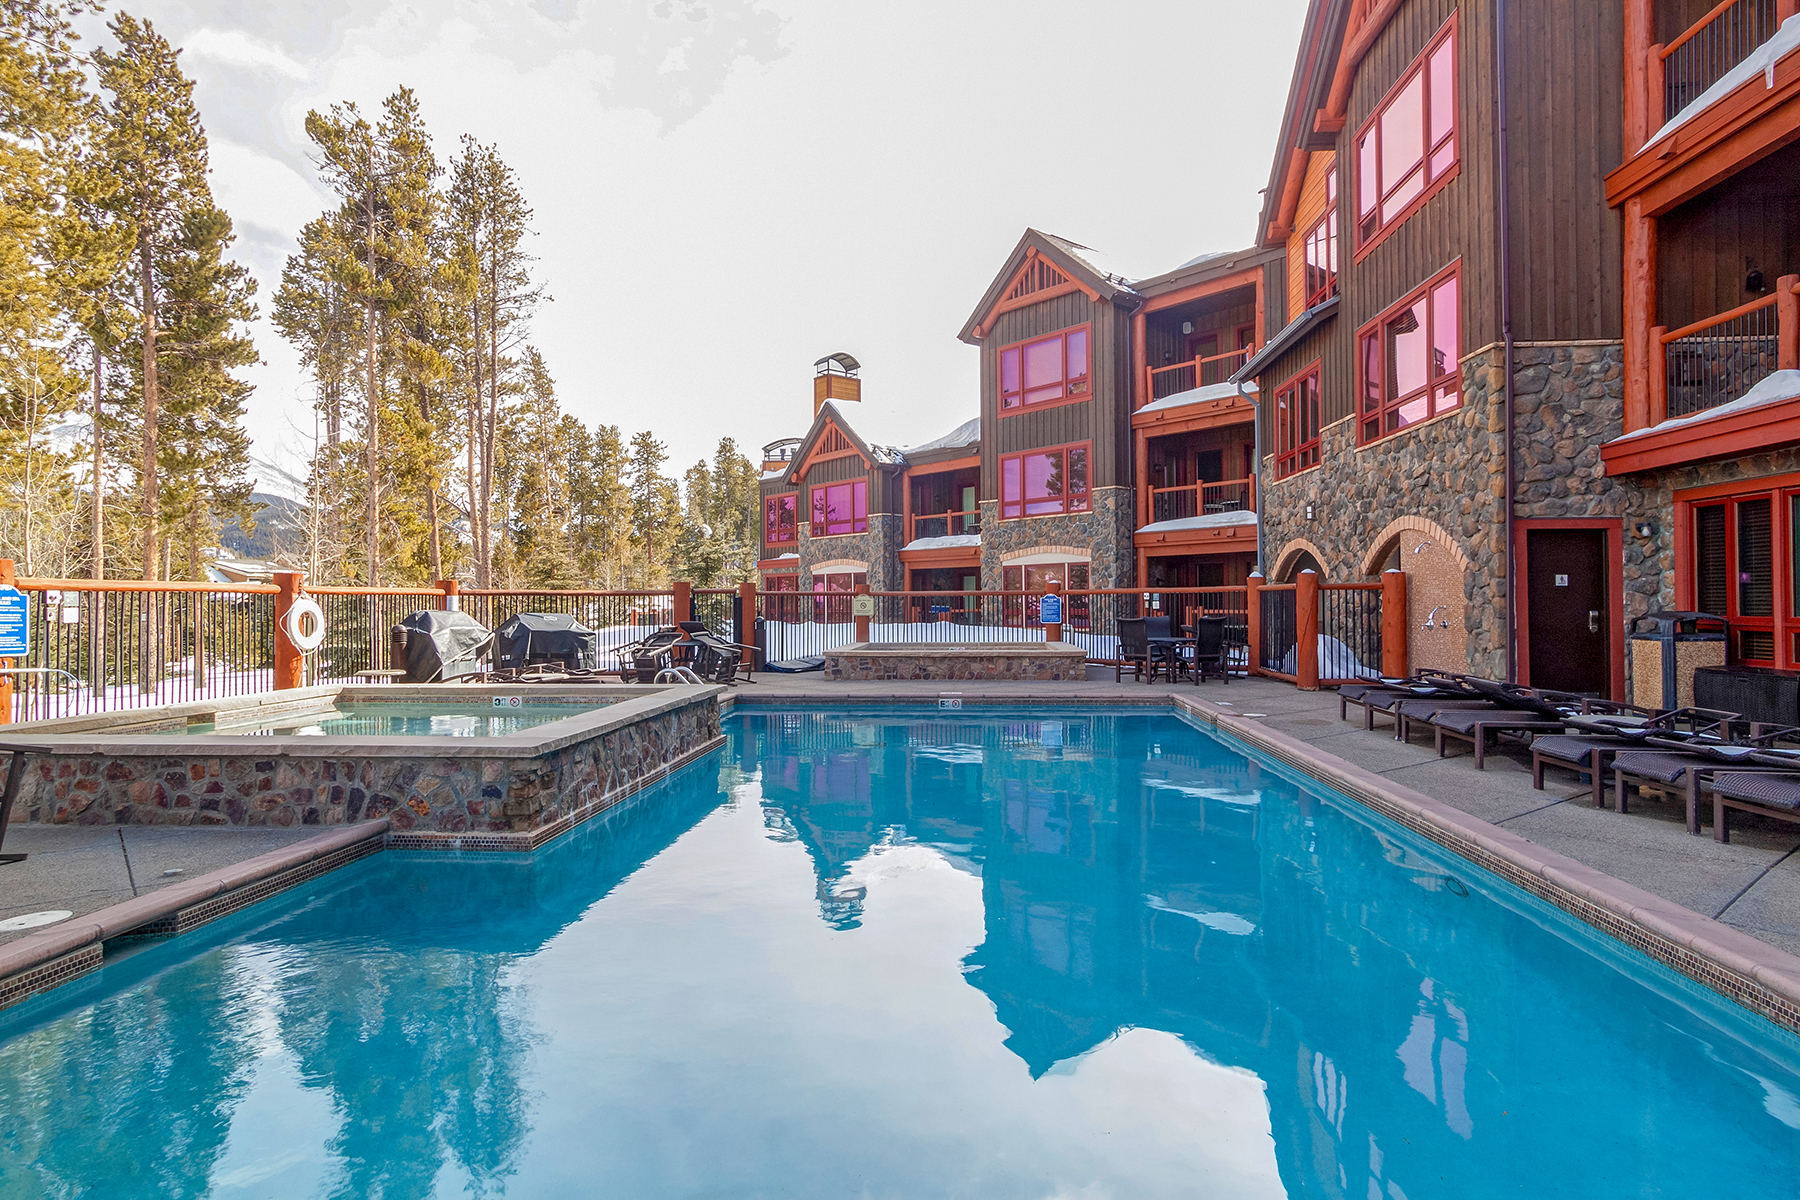 Condos at Blue Sky Breckenridge has amenities: lift pool and more